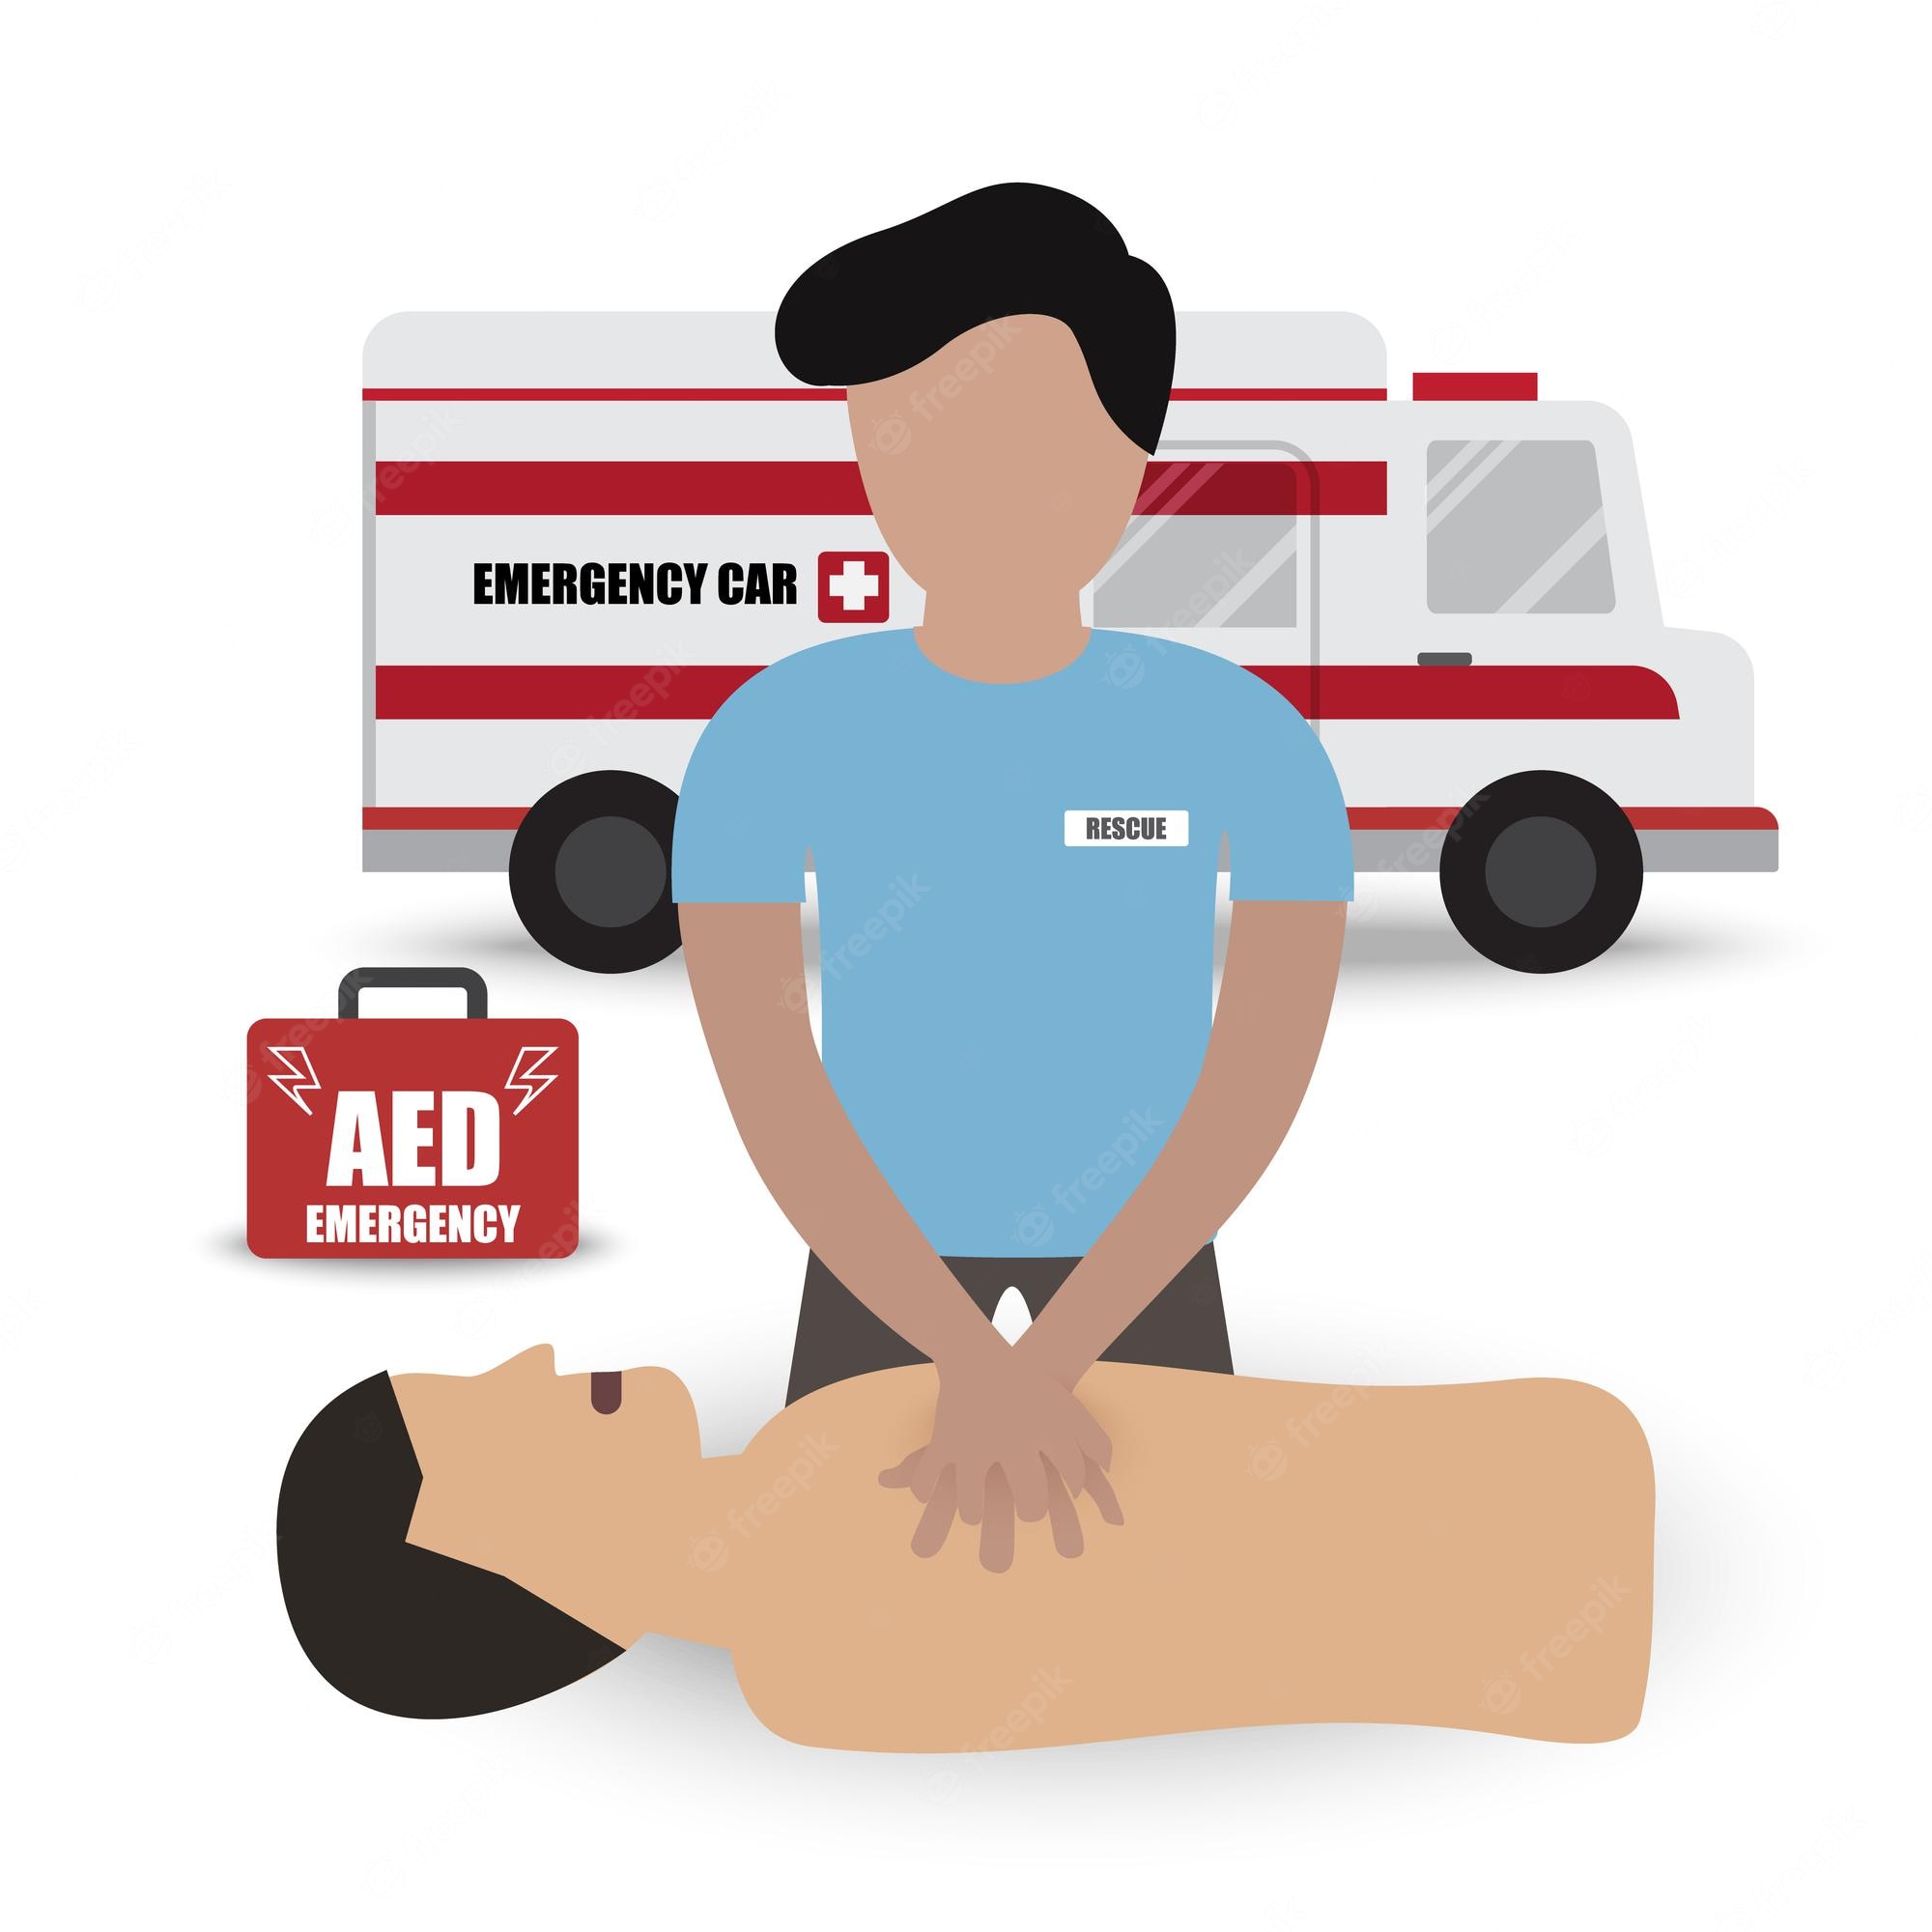 rescue-paramedic-first-aids-emergency-training-with-cpr-dummy-automated-external-defibrillator-aed-ambulance-car-infographic-vector_29393-578